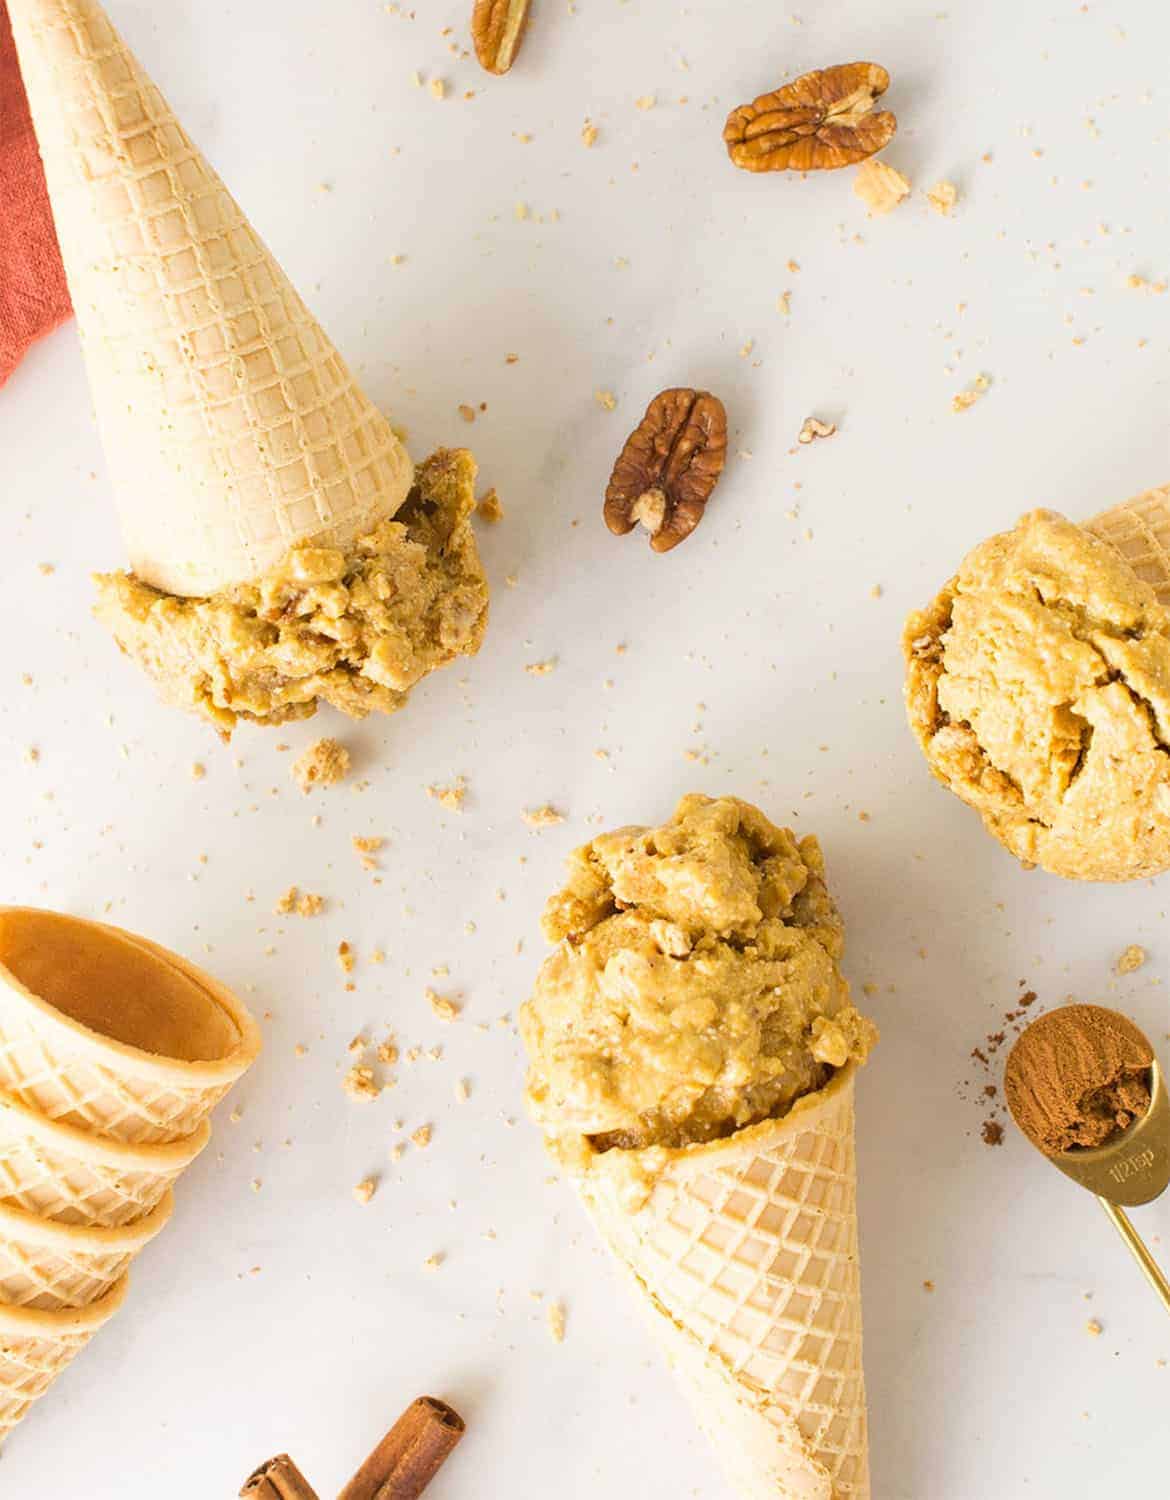 Vegan pumpkin ice cream with cones over a white background - Mindful Avocado